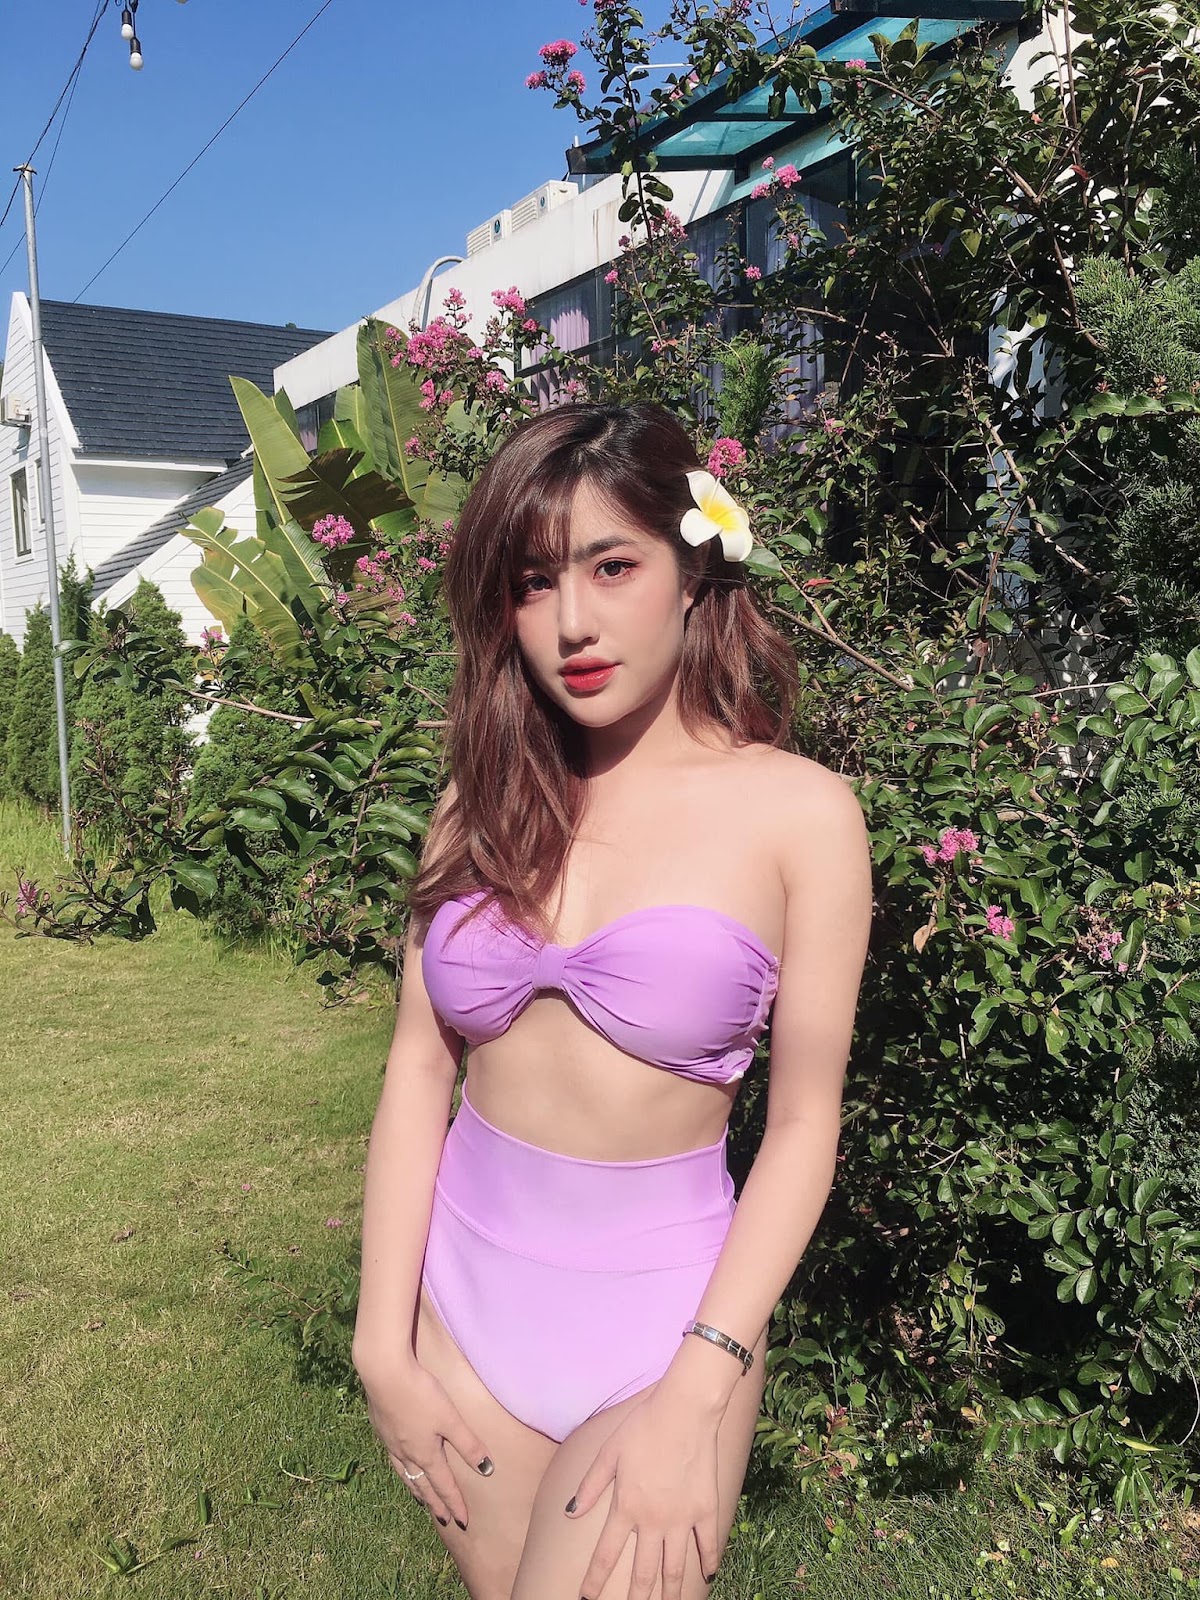 It's been a long time since she wore a bikini, female streamer Thao Anh still makes people teary-eyed with her curvaceous body - Photo 8.